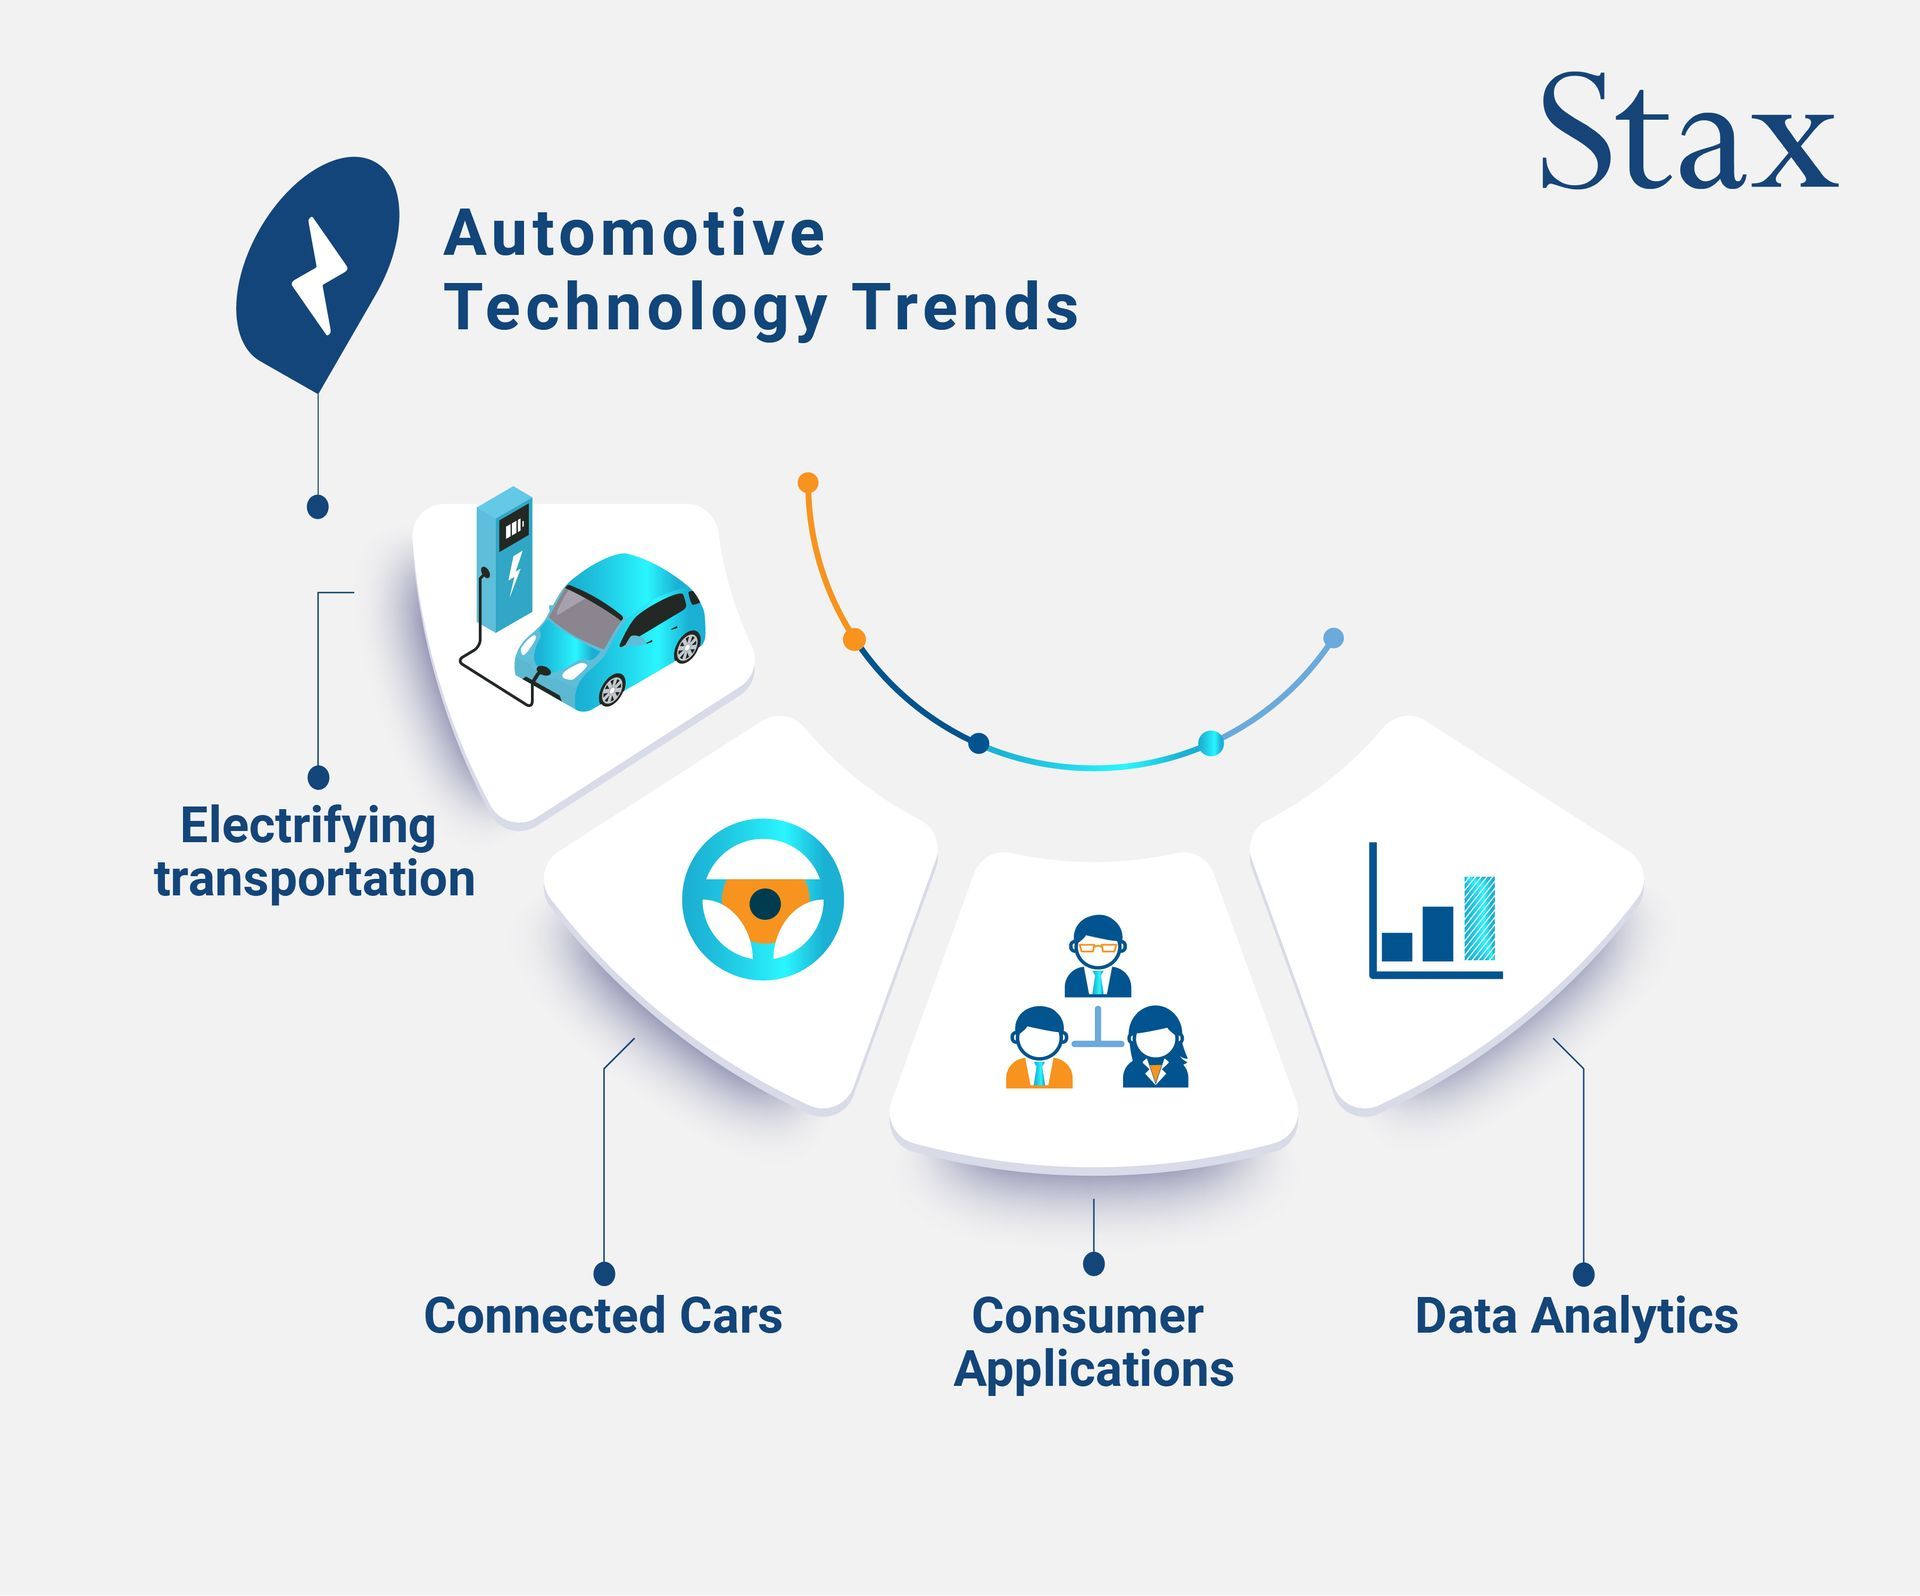 An infographic or diagram visualizing four automotive technology trends such as, electrifying transportation, connected cars, consumer applications, and data analytics.